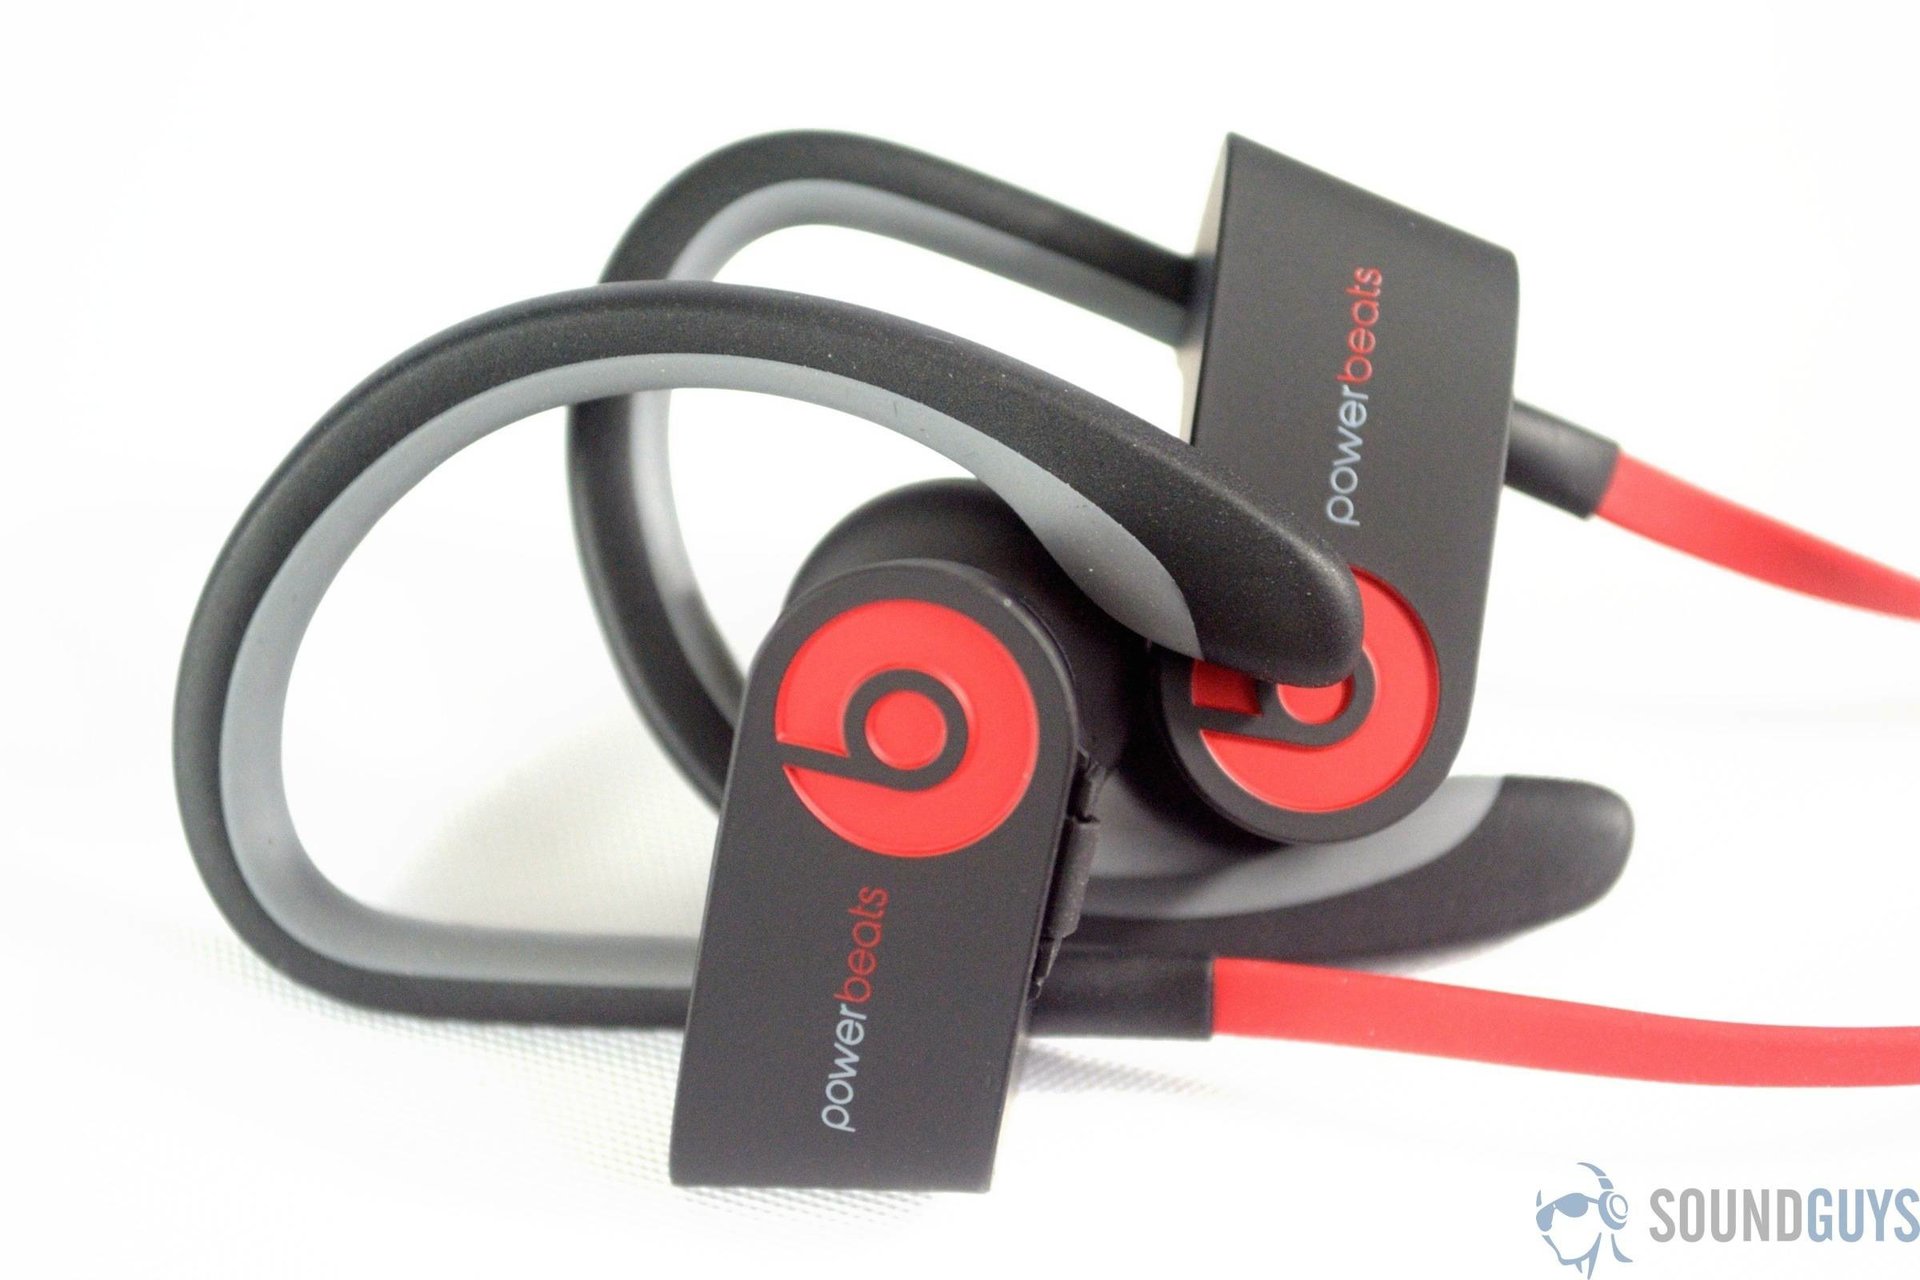 how to connect powerbeats 2 wireless to android